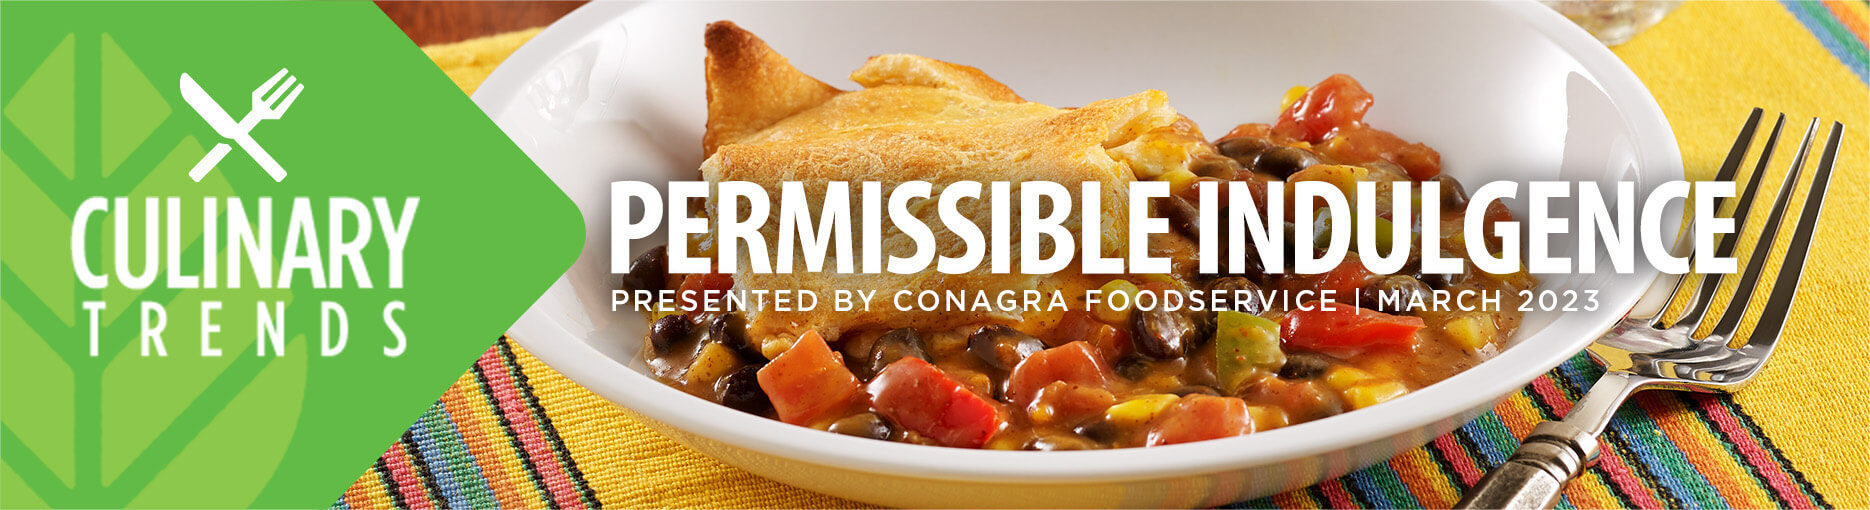 Culinary Trends March 2023, presented by Conagra Foodservice: Permissible Indulgence